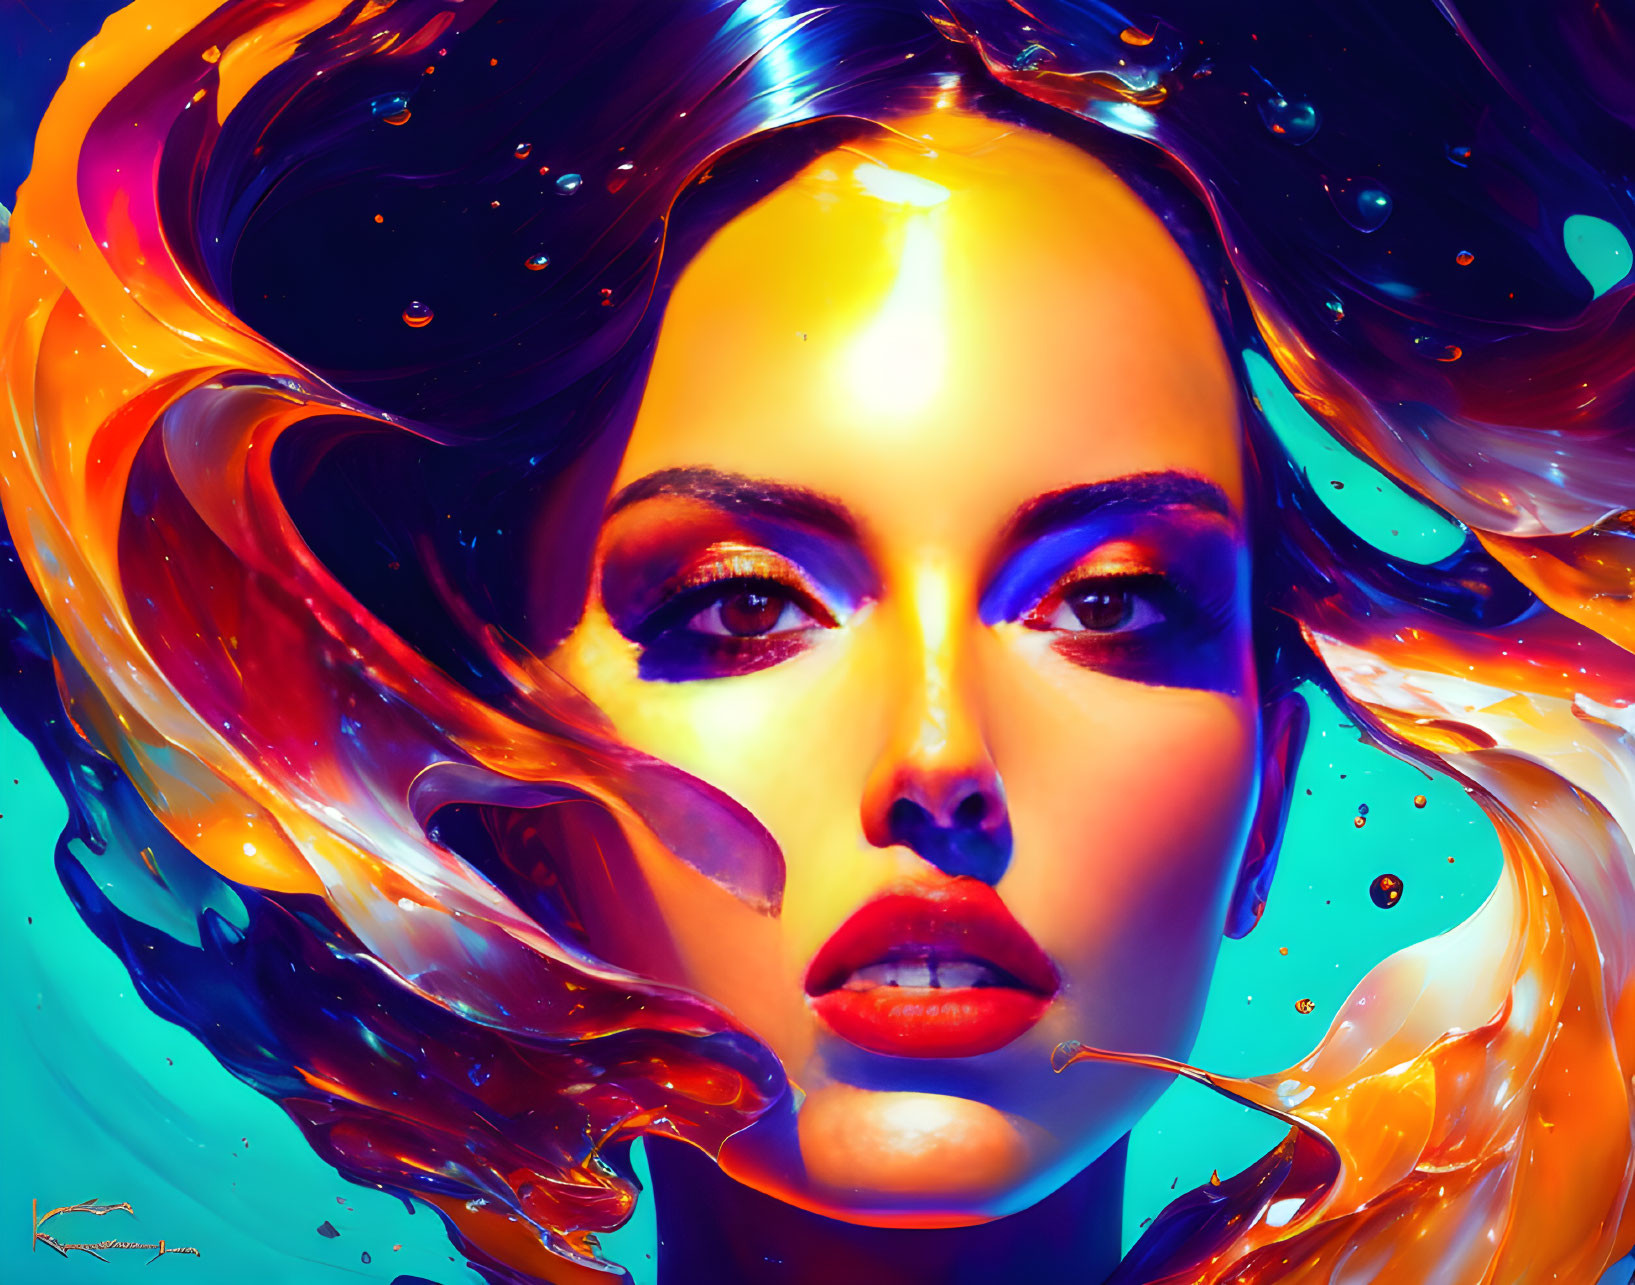 Colorful digital artwork of woman's face with fiery hair against blue backdrop